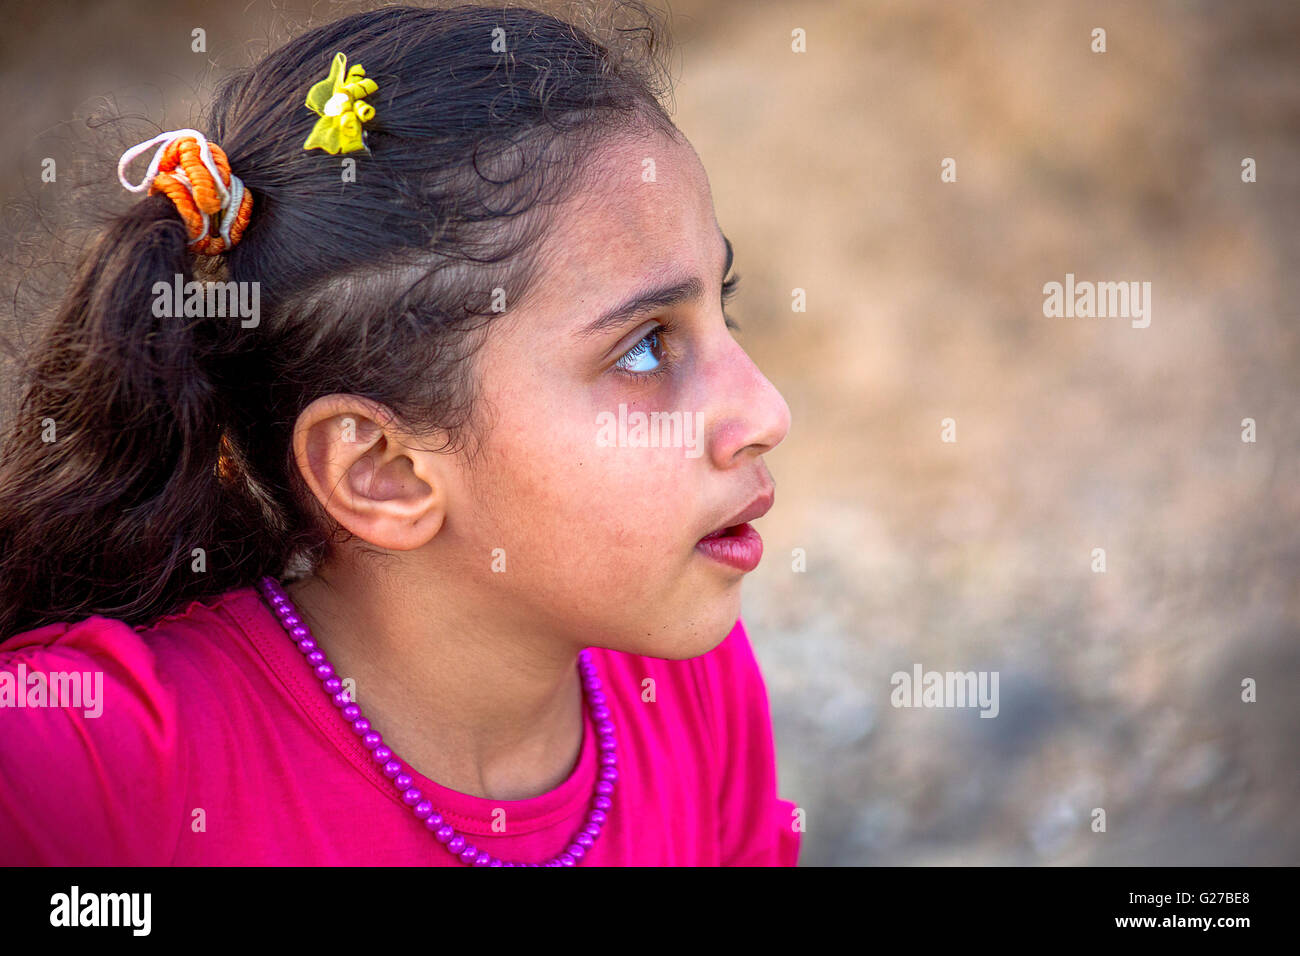 Profile portrait of a nine year old girl in a red dress, red beaded necklace, and pigtails. Stock Photo